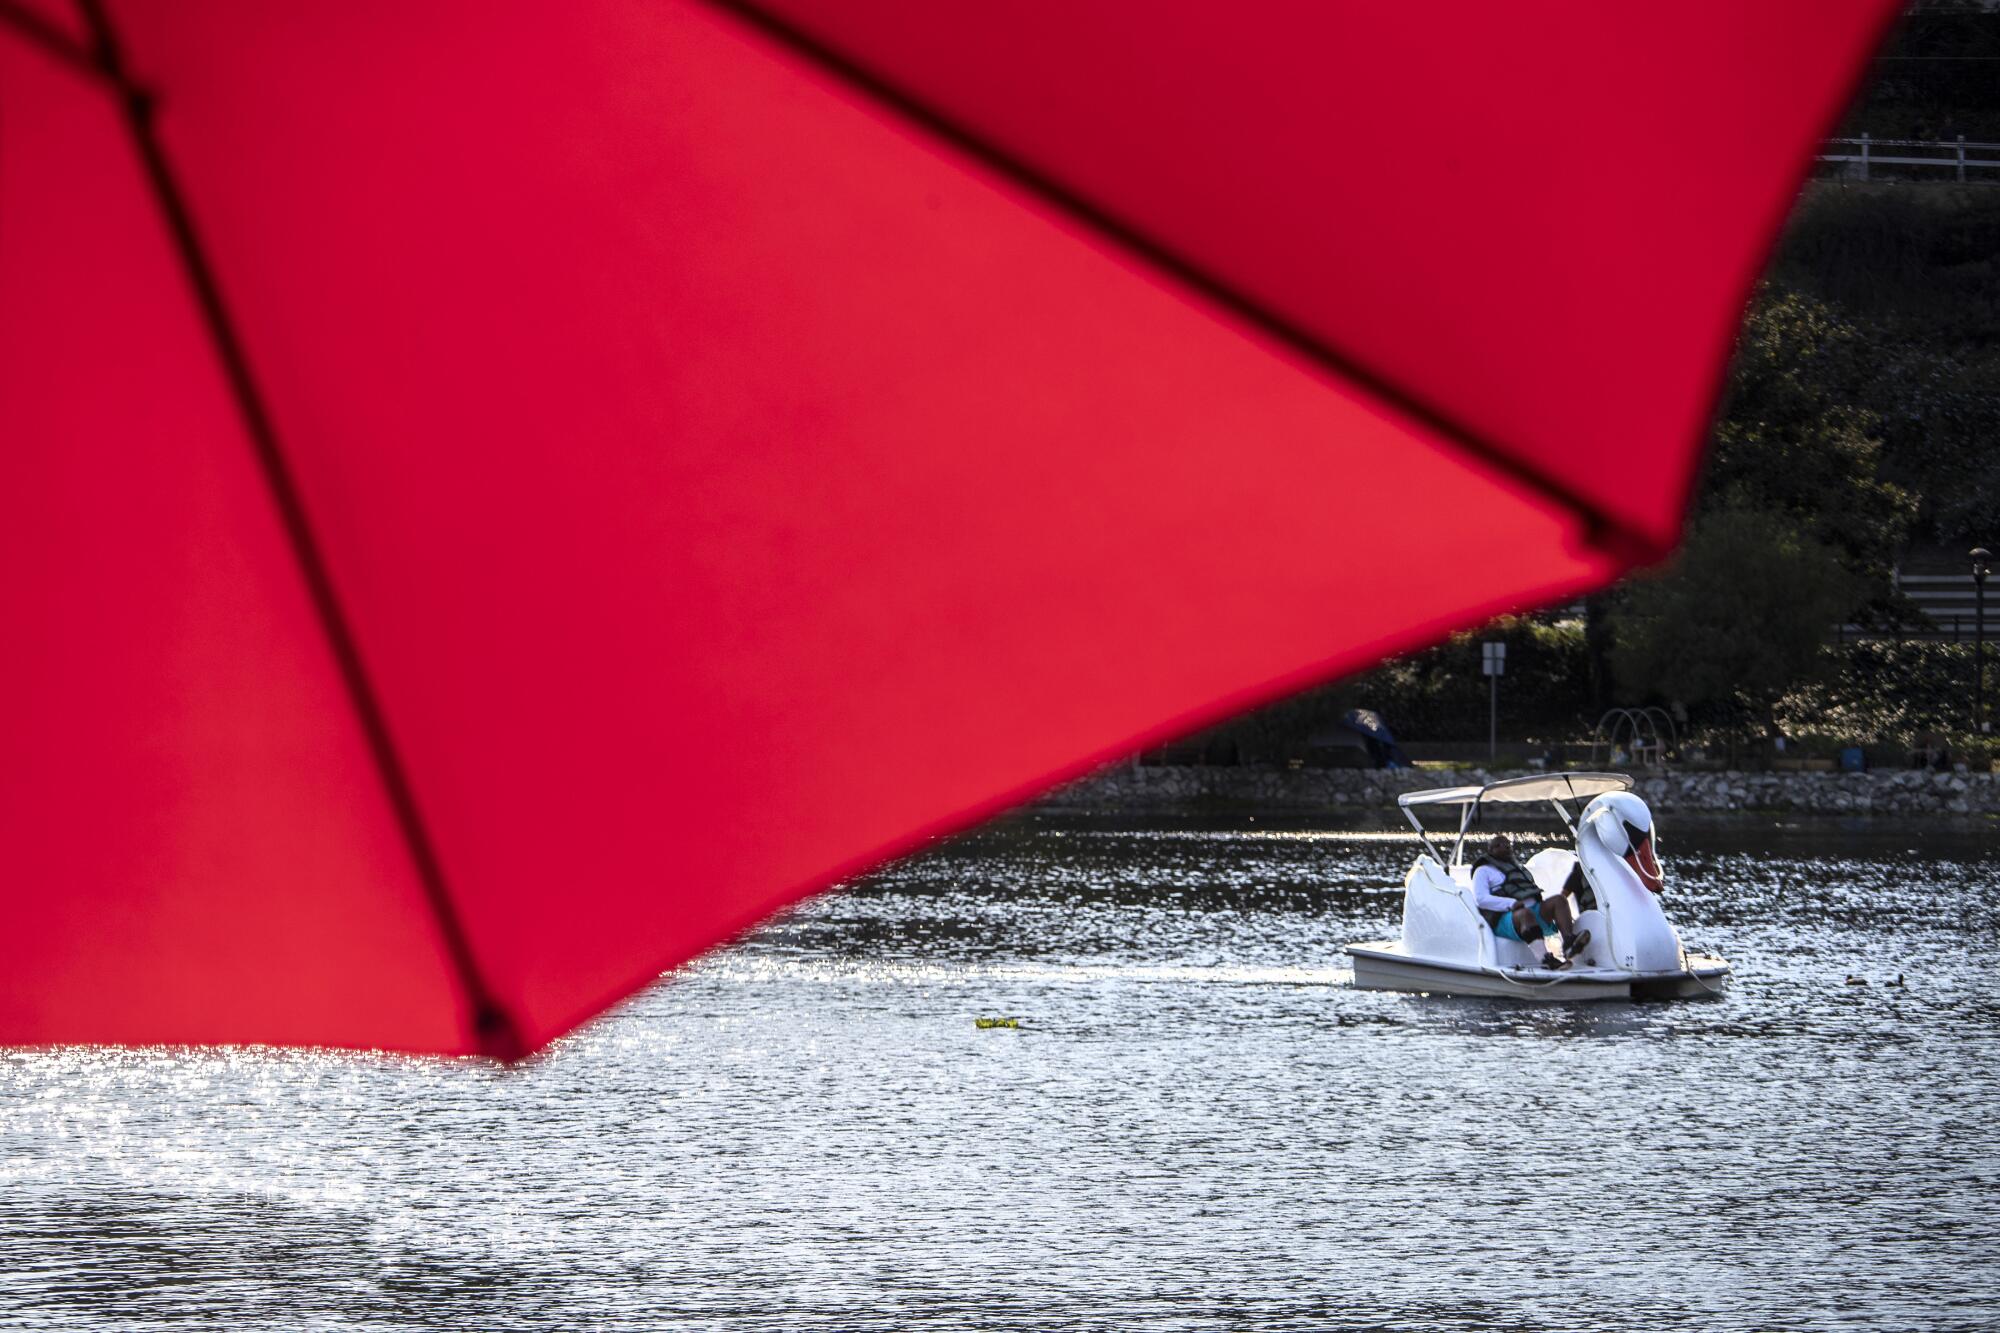 A swan boat in Echo Park lake under a red canopy